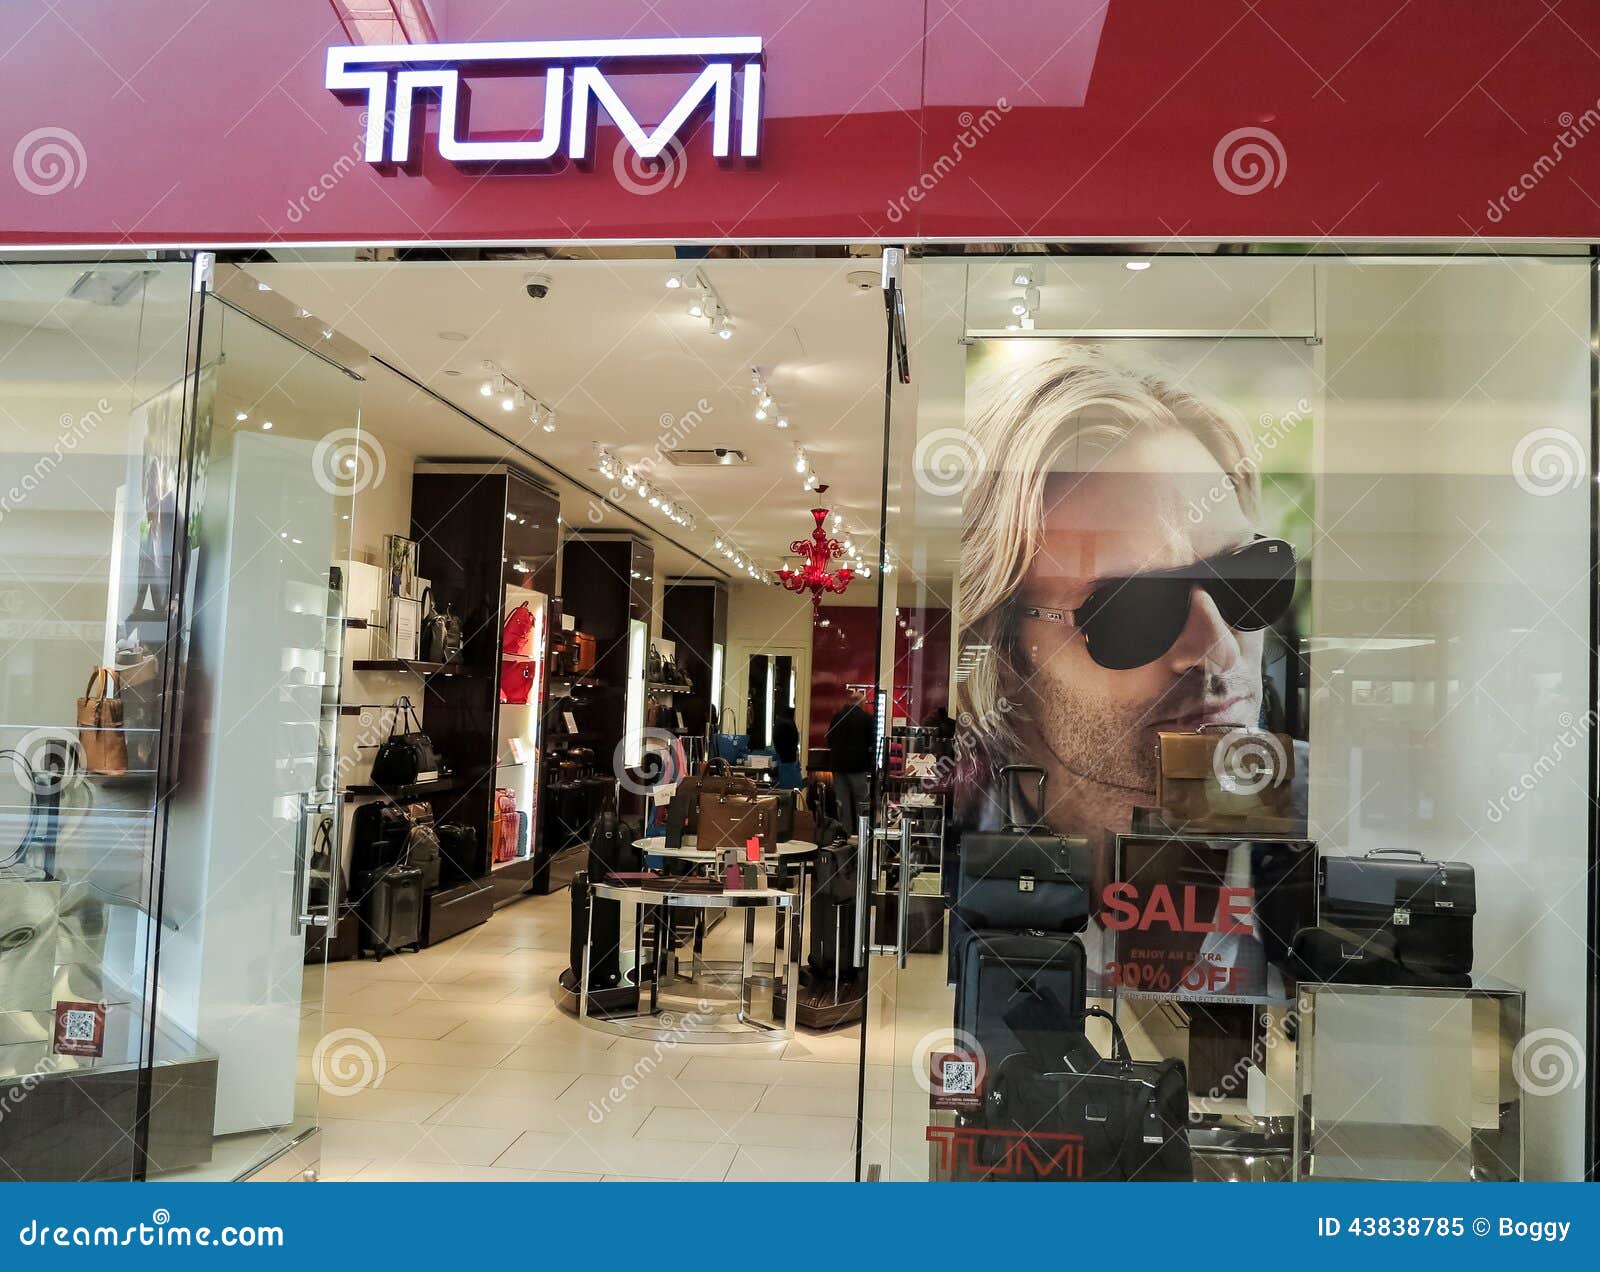 Tumi store editorial image. Image of business, luggage - 43838785